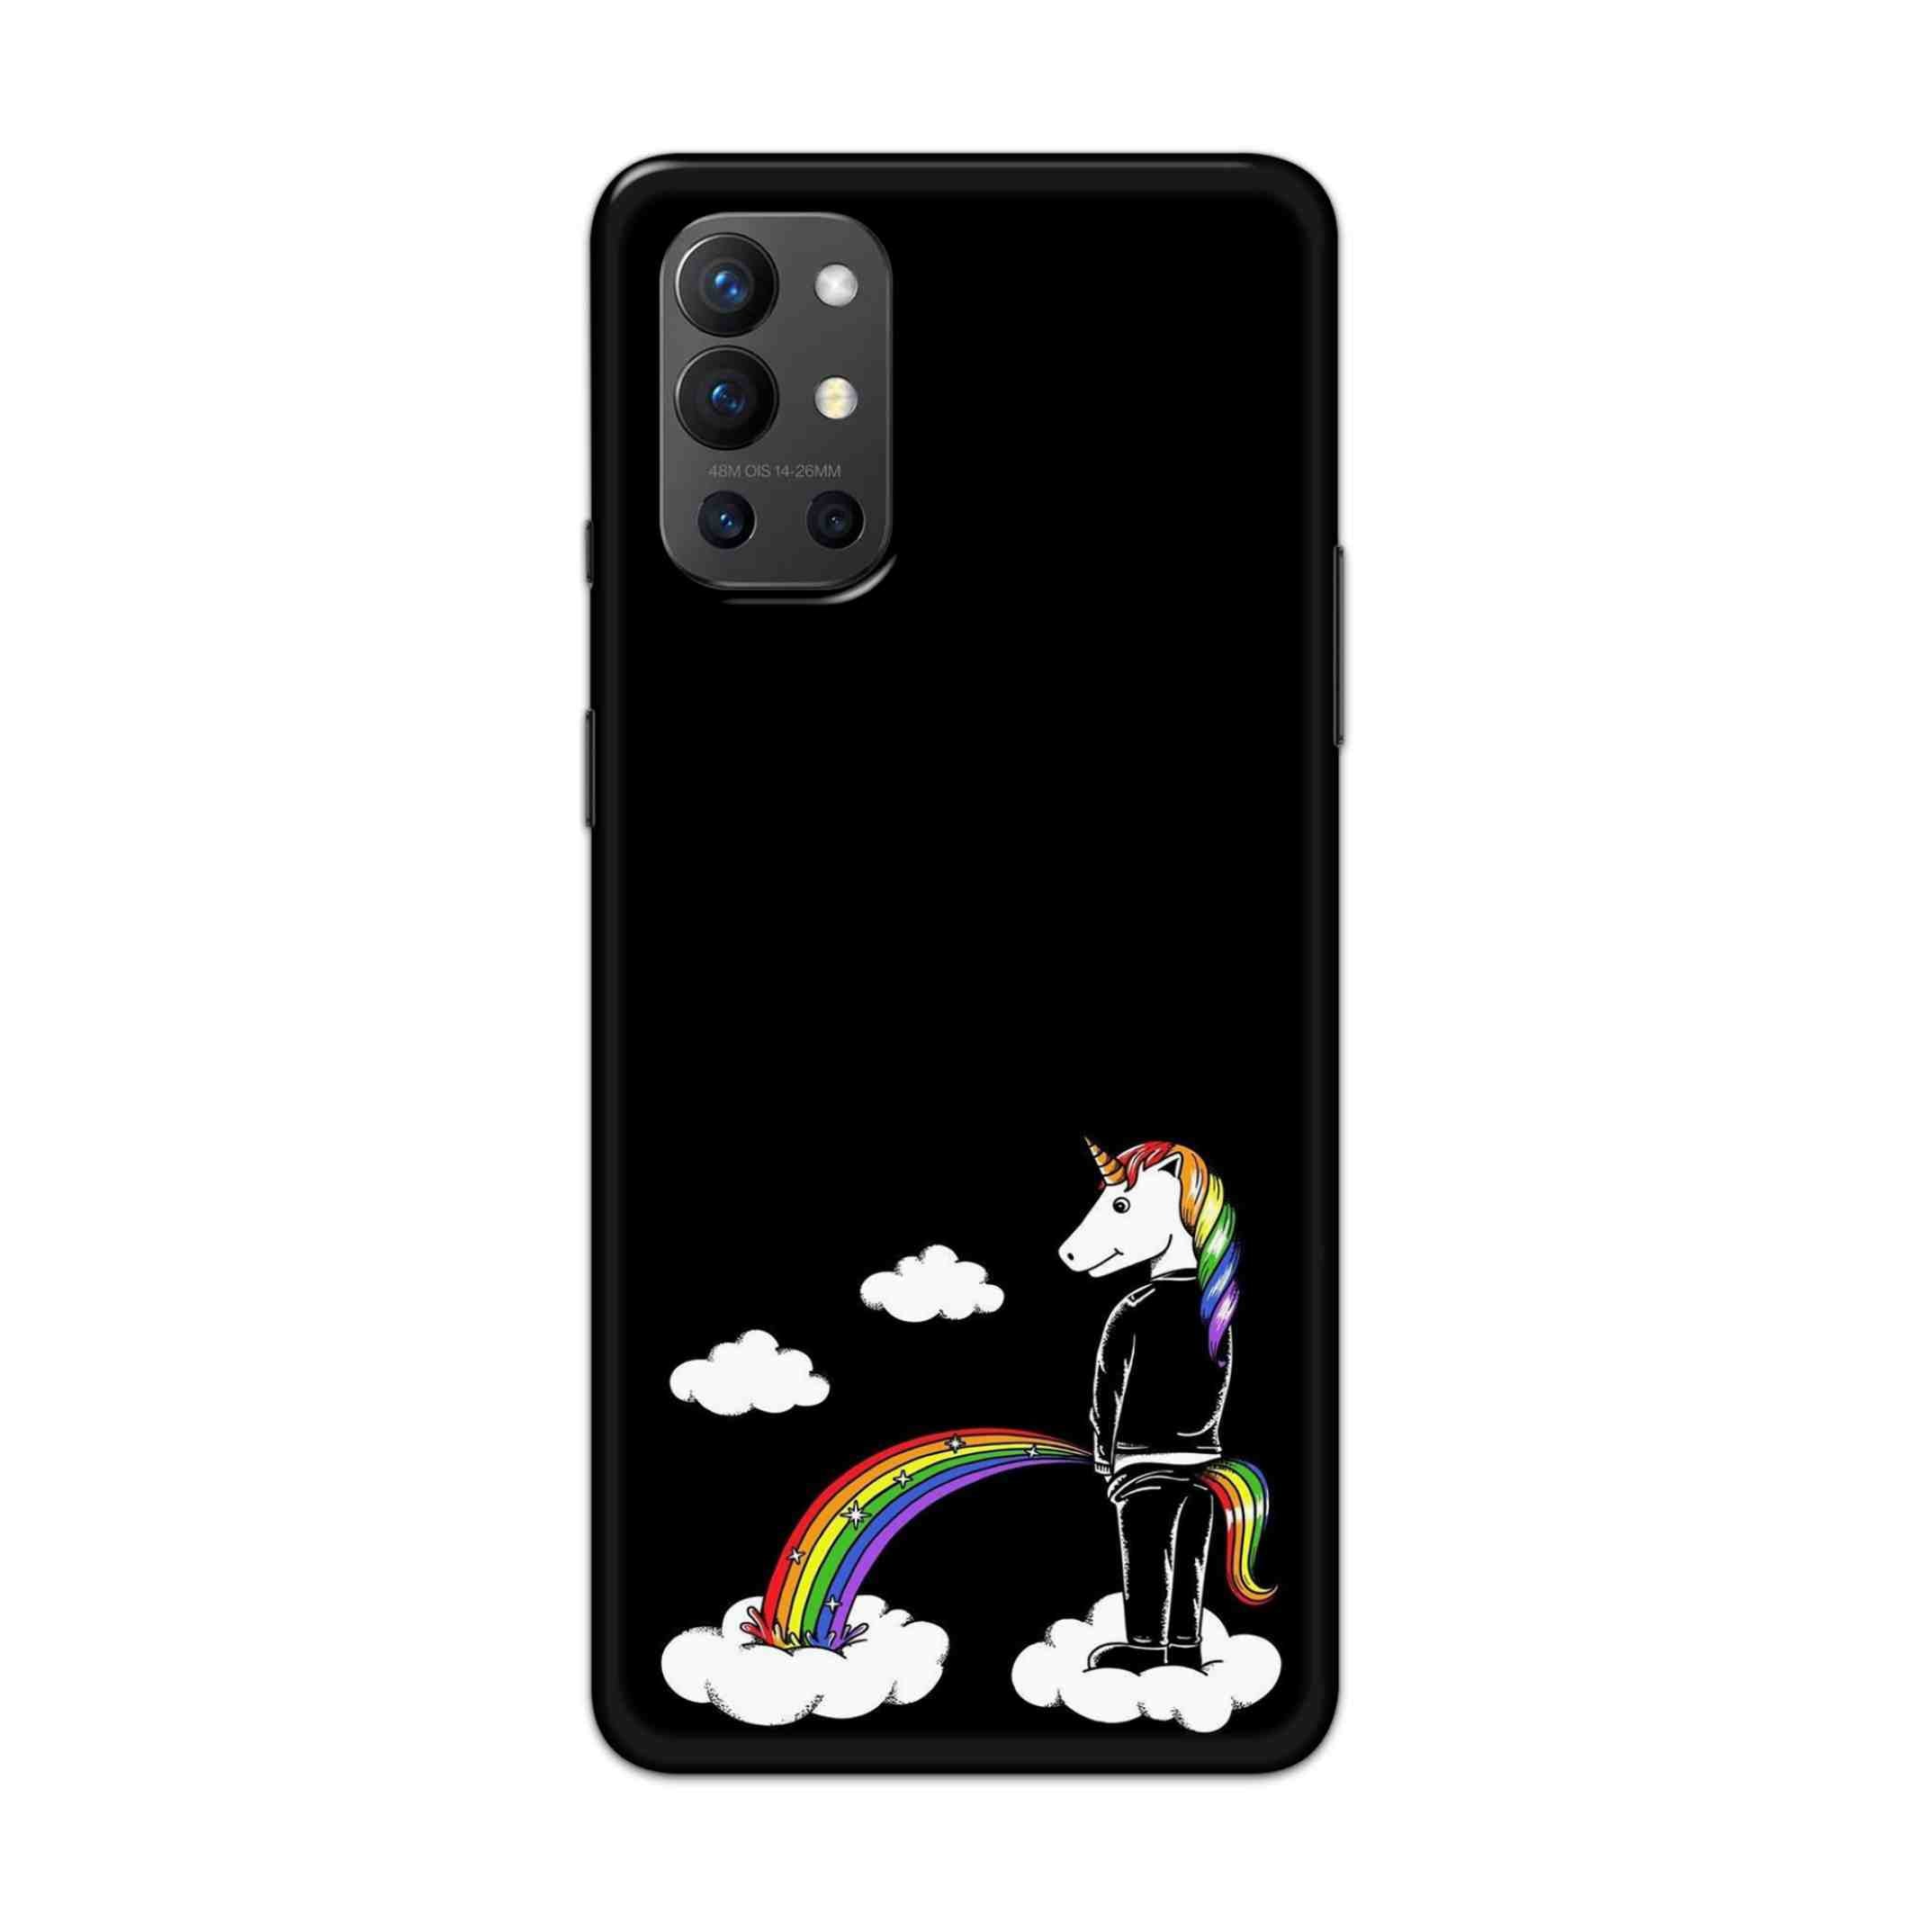 Buy  Toilet Horse Hard Back Mobile Phone Case Cover For OnePlus 9R / 8T Online